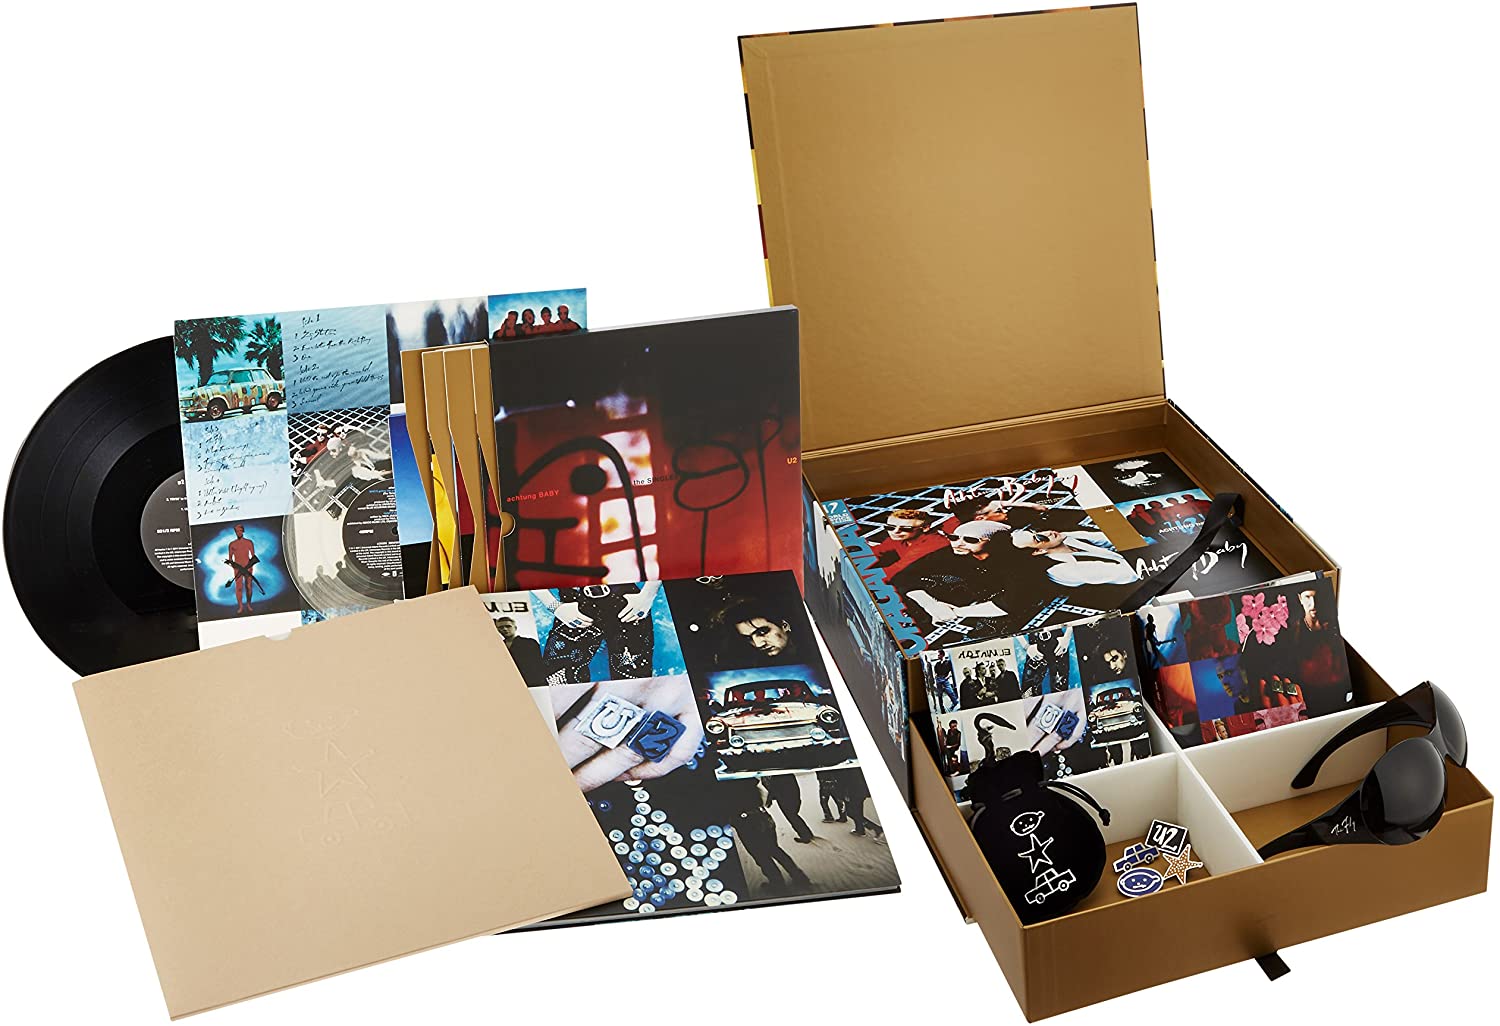 u2 achtung baby super deluxe edition disc 2